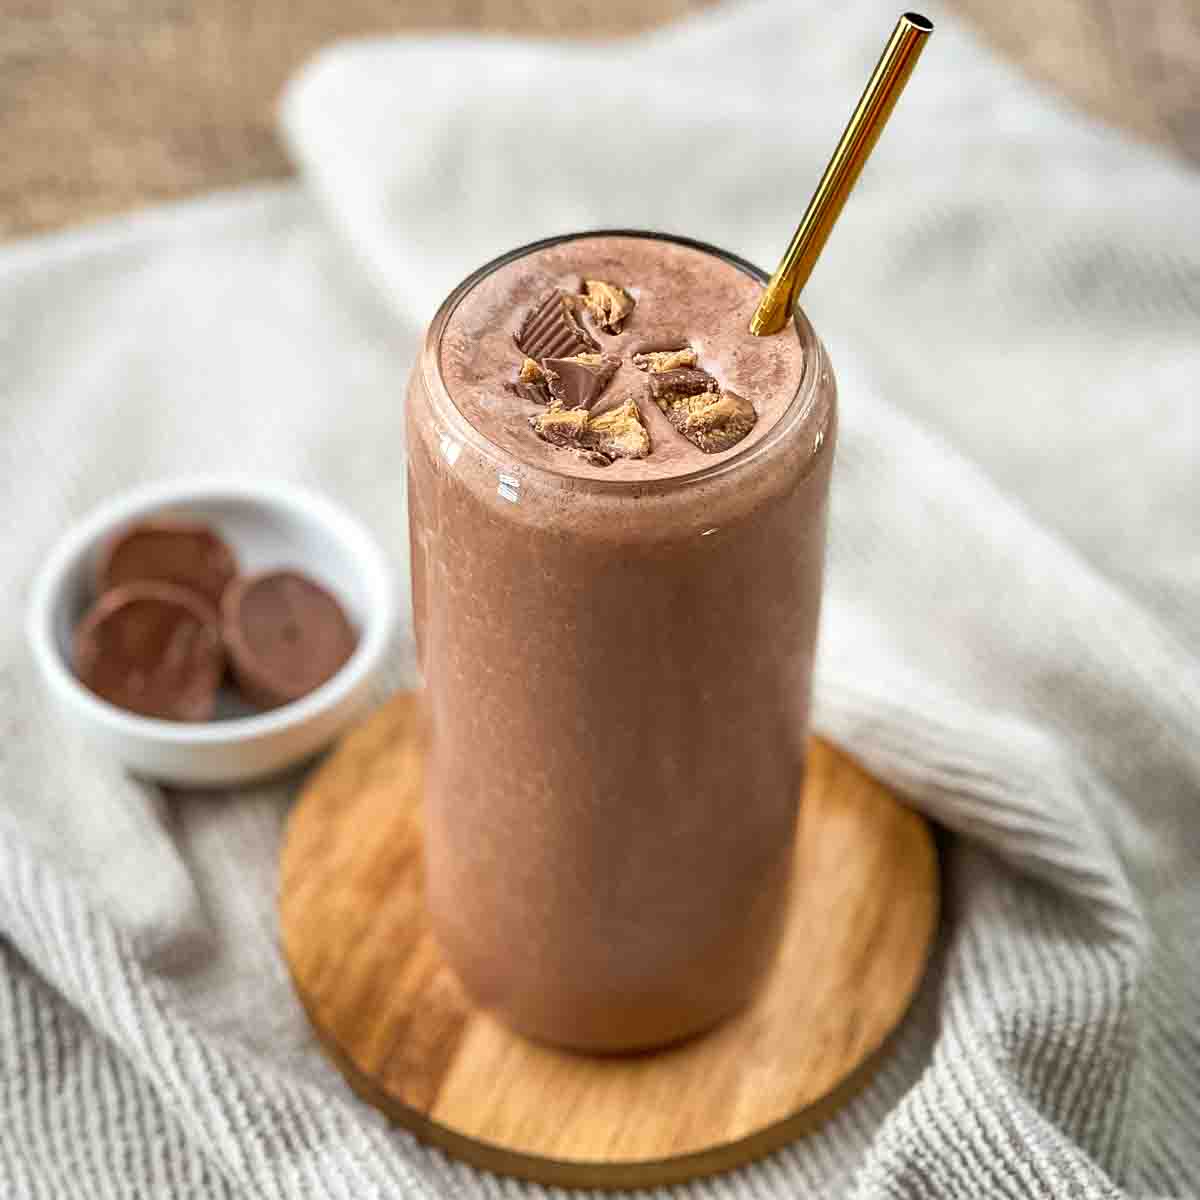 A peanut butter cup smoothie in a tall glass with a gold straw, garnished with crumbled peanut butter cups.